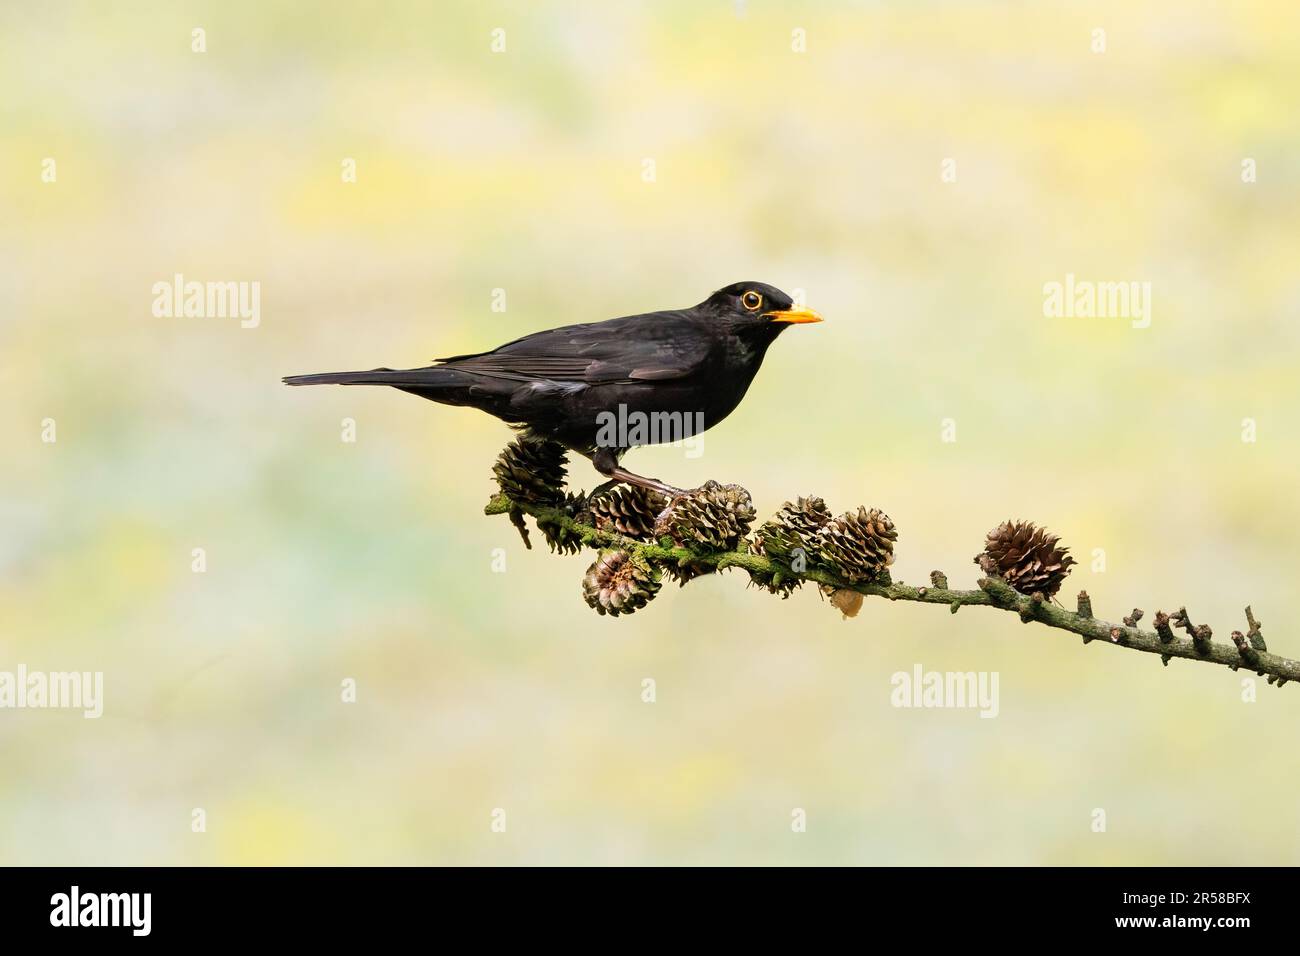 Close up of a male Blackbird, Turdus merula, with beautiful yellow eye ring and yellow beak standing and looking up with eye contact on a Larch branch Stock Photo